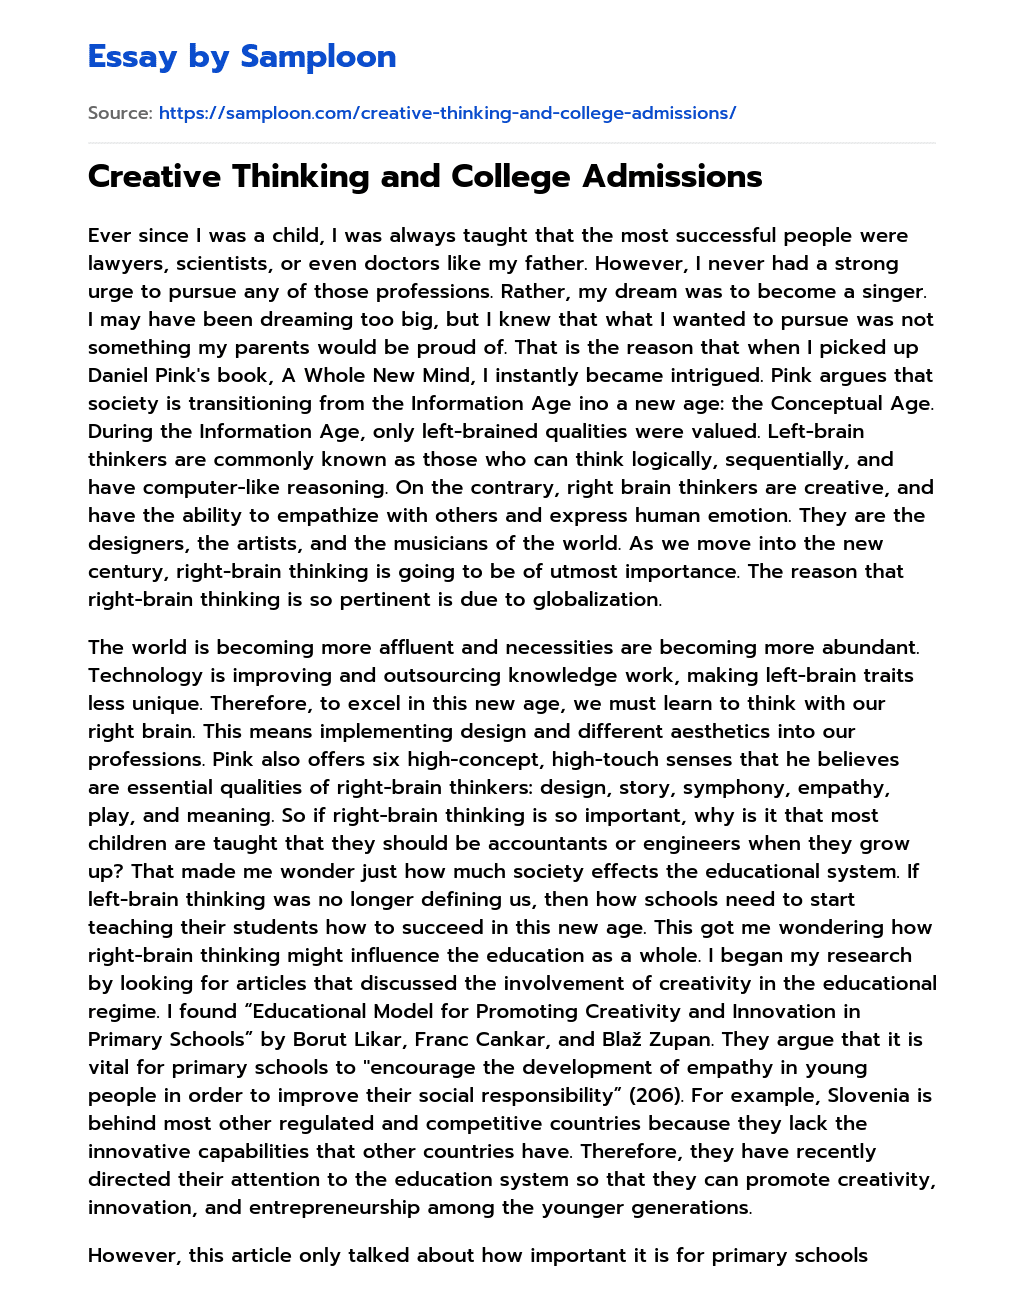 Creative Thinking and College Admissions essay